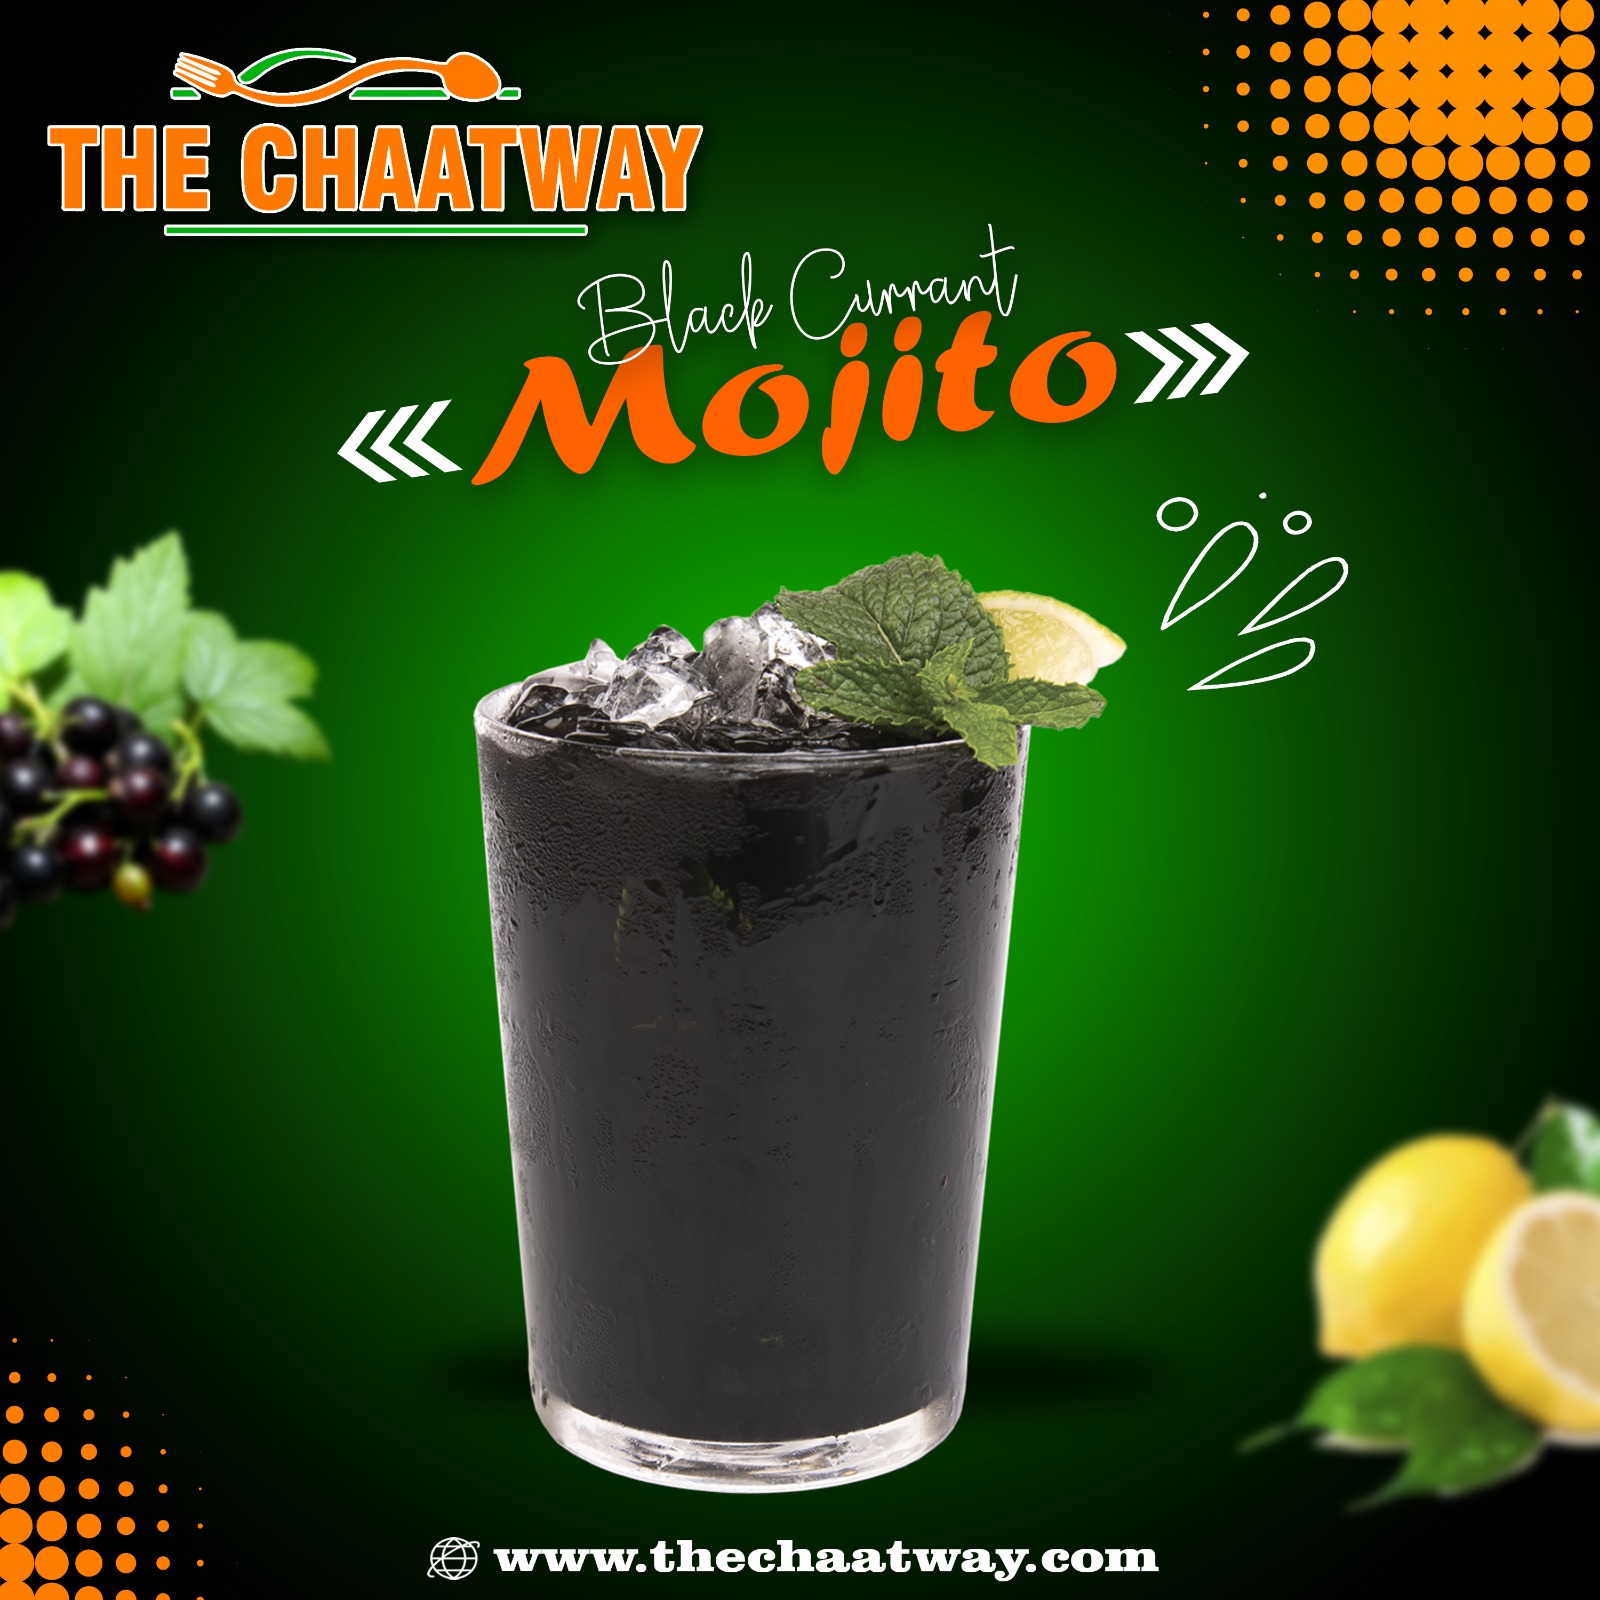  The Chaatway Cafe, trendy Mojito